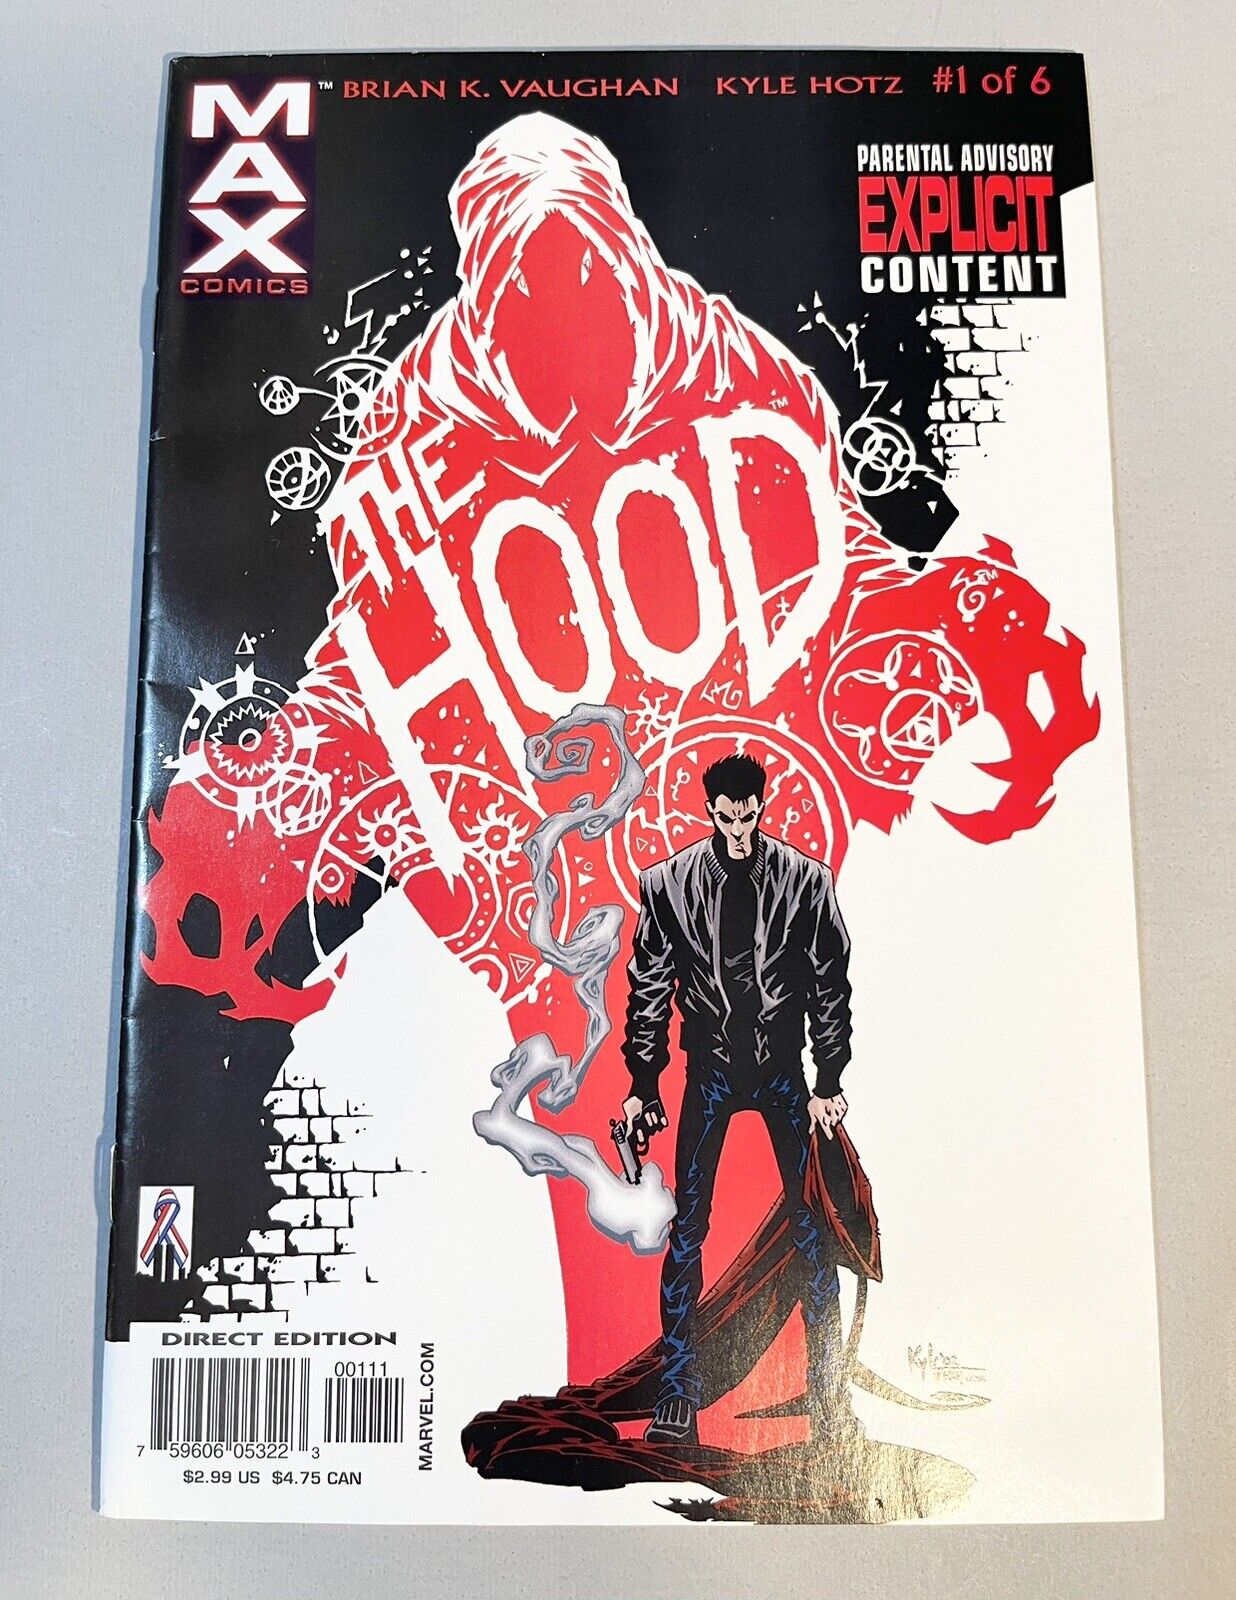 The Hood (2002) #   1-6  1st Parker Robbins COMPLETE SET  Check Out The Pics